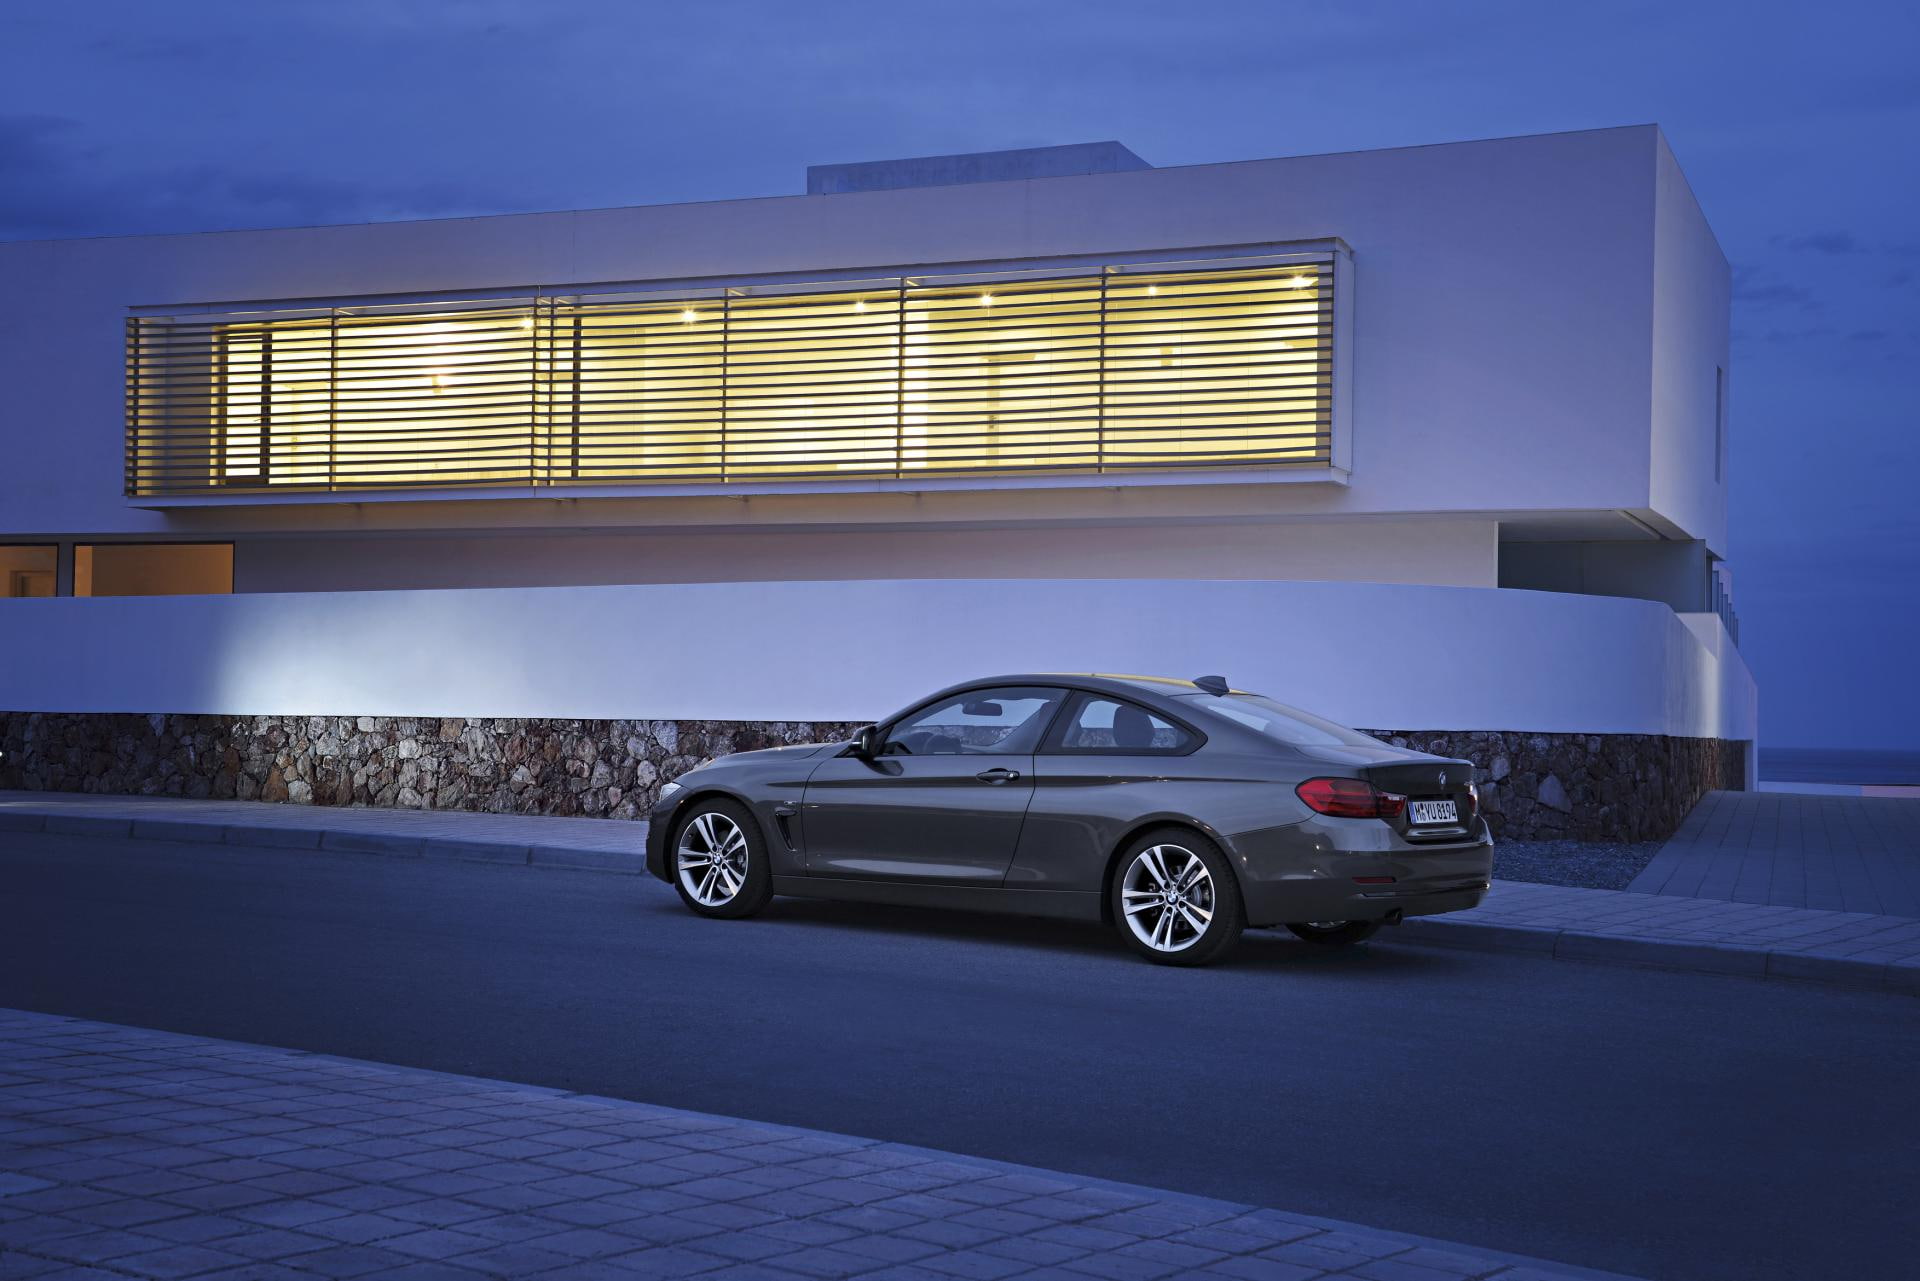 BMW 4 Series Coupe, new bmw_4 series coupe 2014, car, motor vehicle